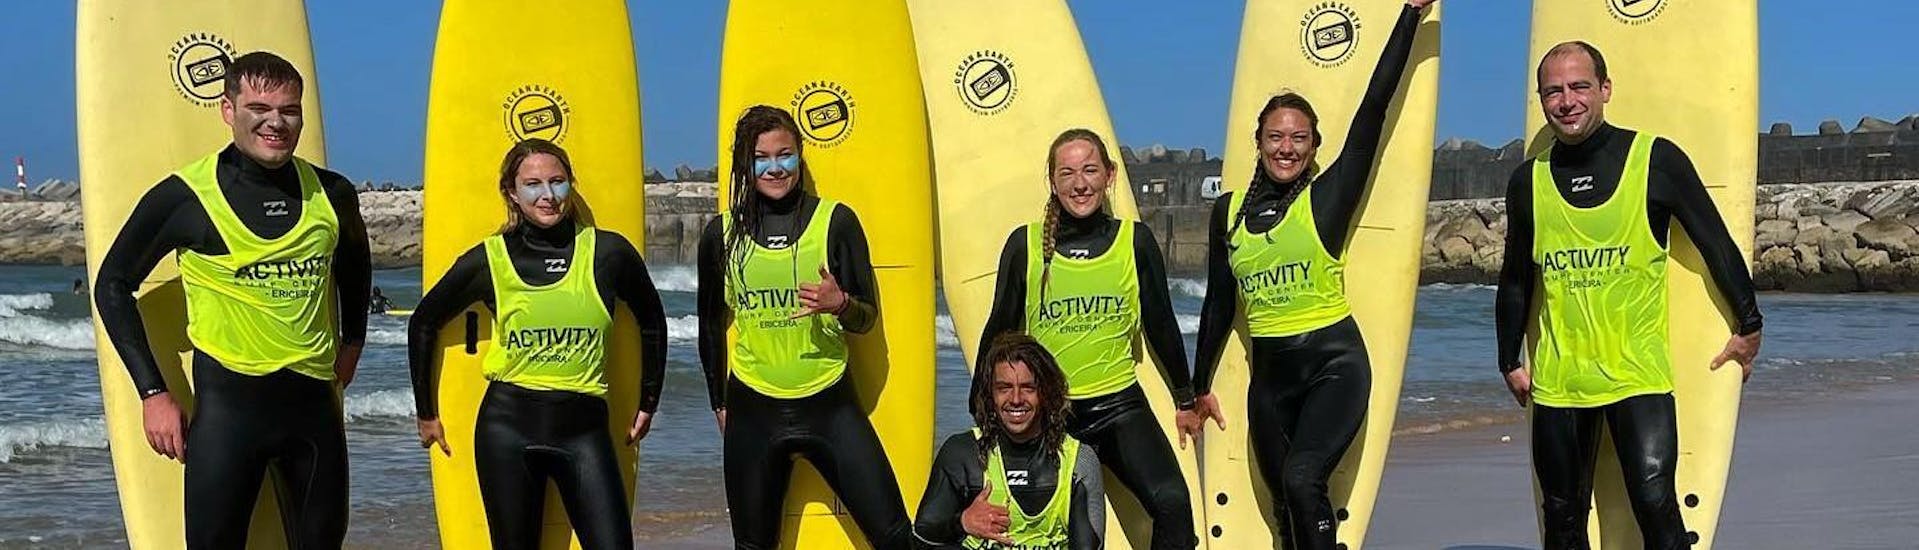 Some participants of the surfing lessons of Activity Surf Center in Ericeira.